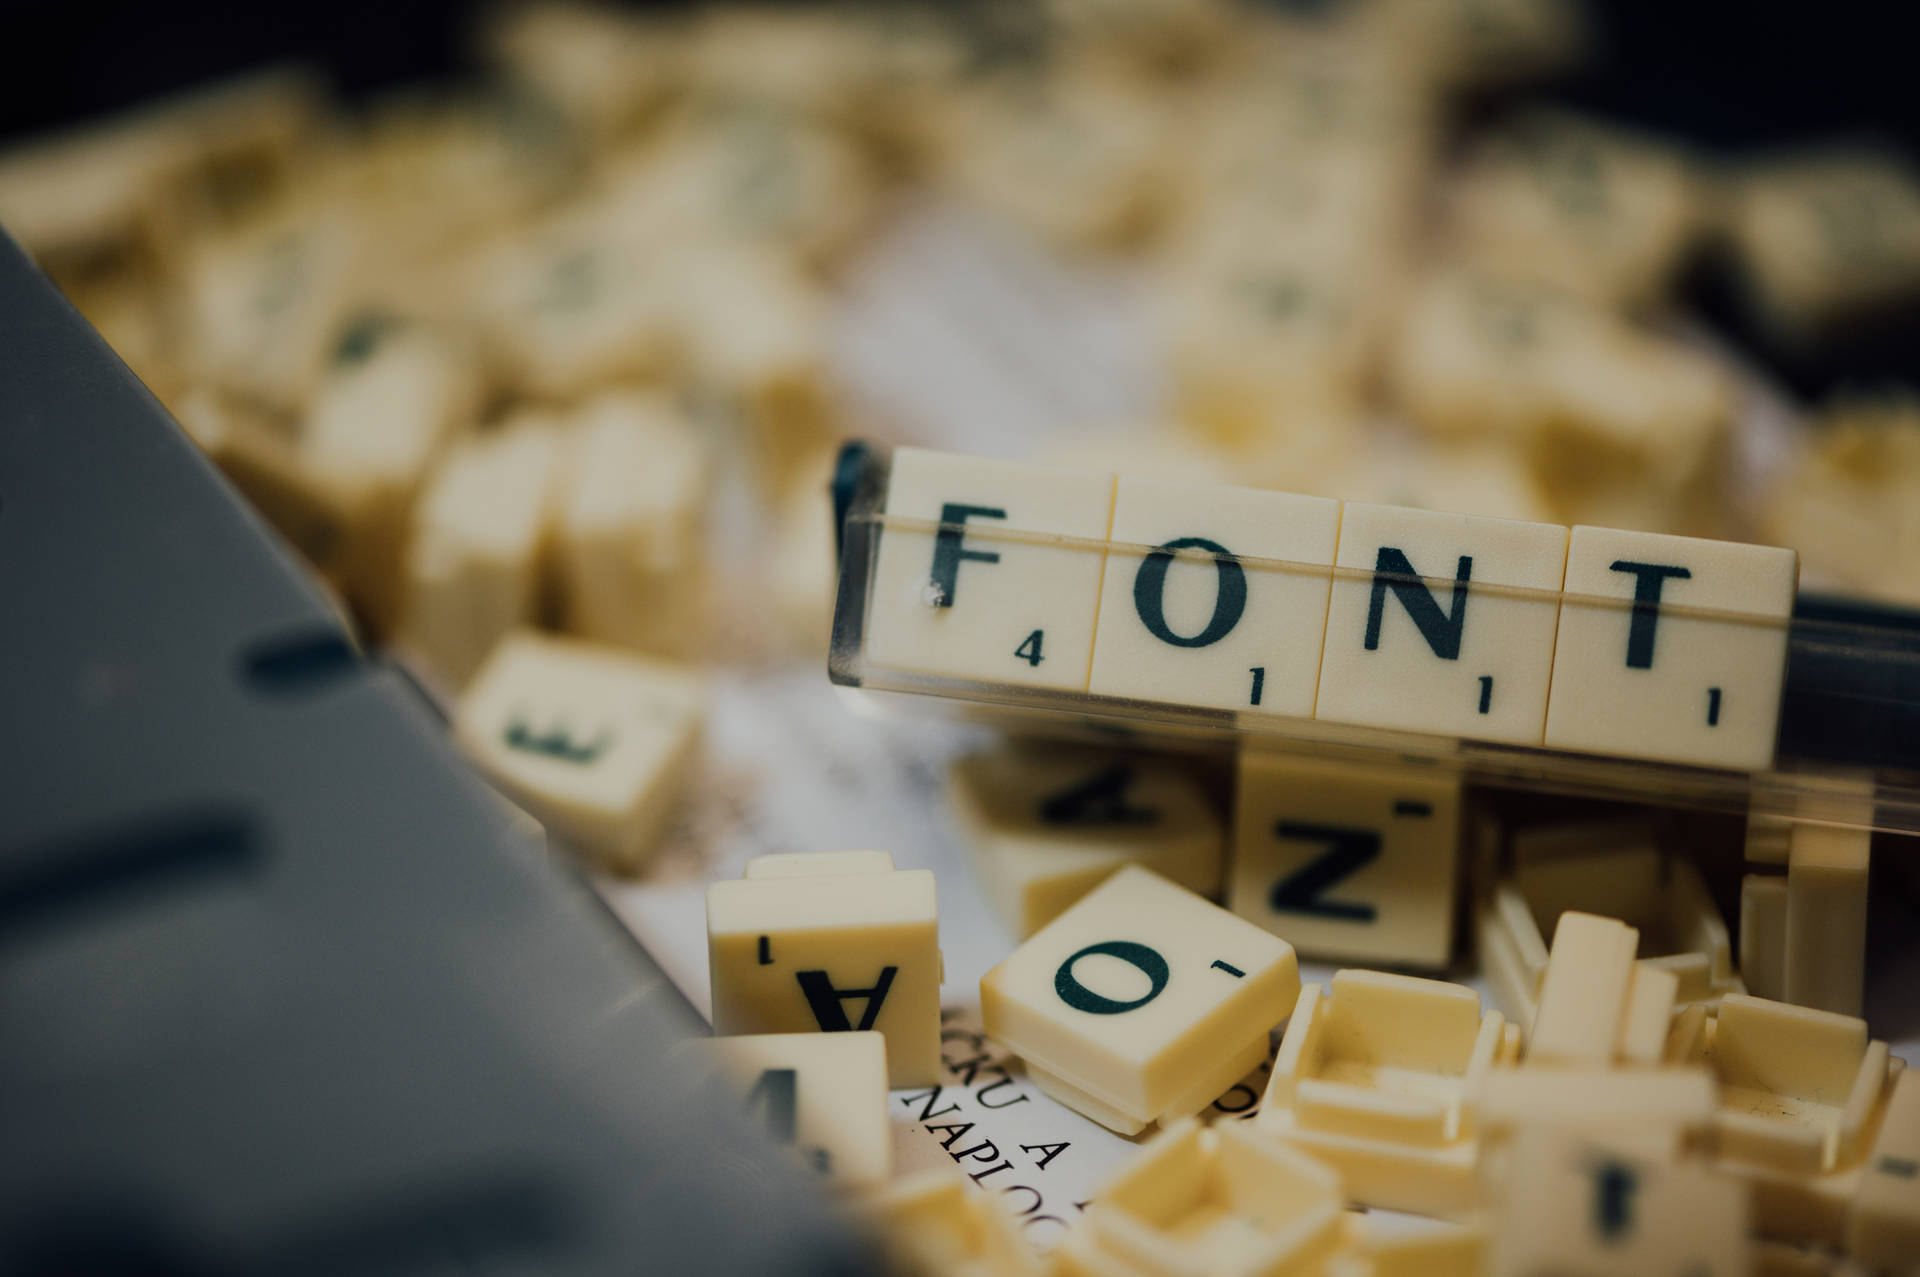 Caption: Close-up Of Scrabble Tiles Spelling 